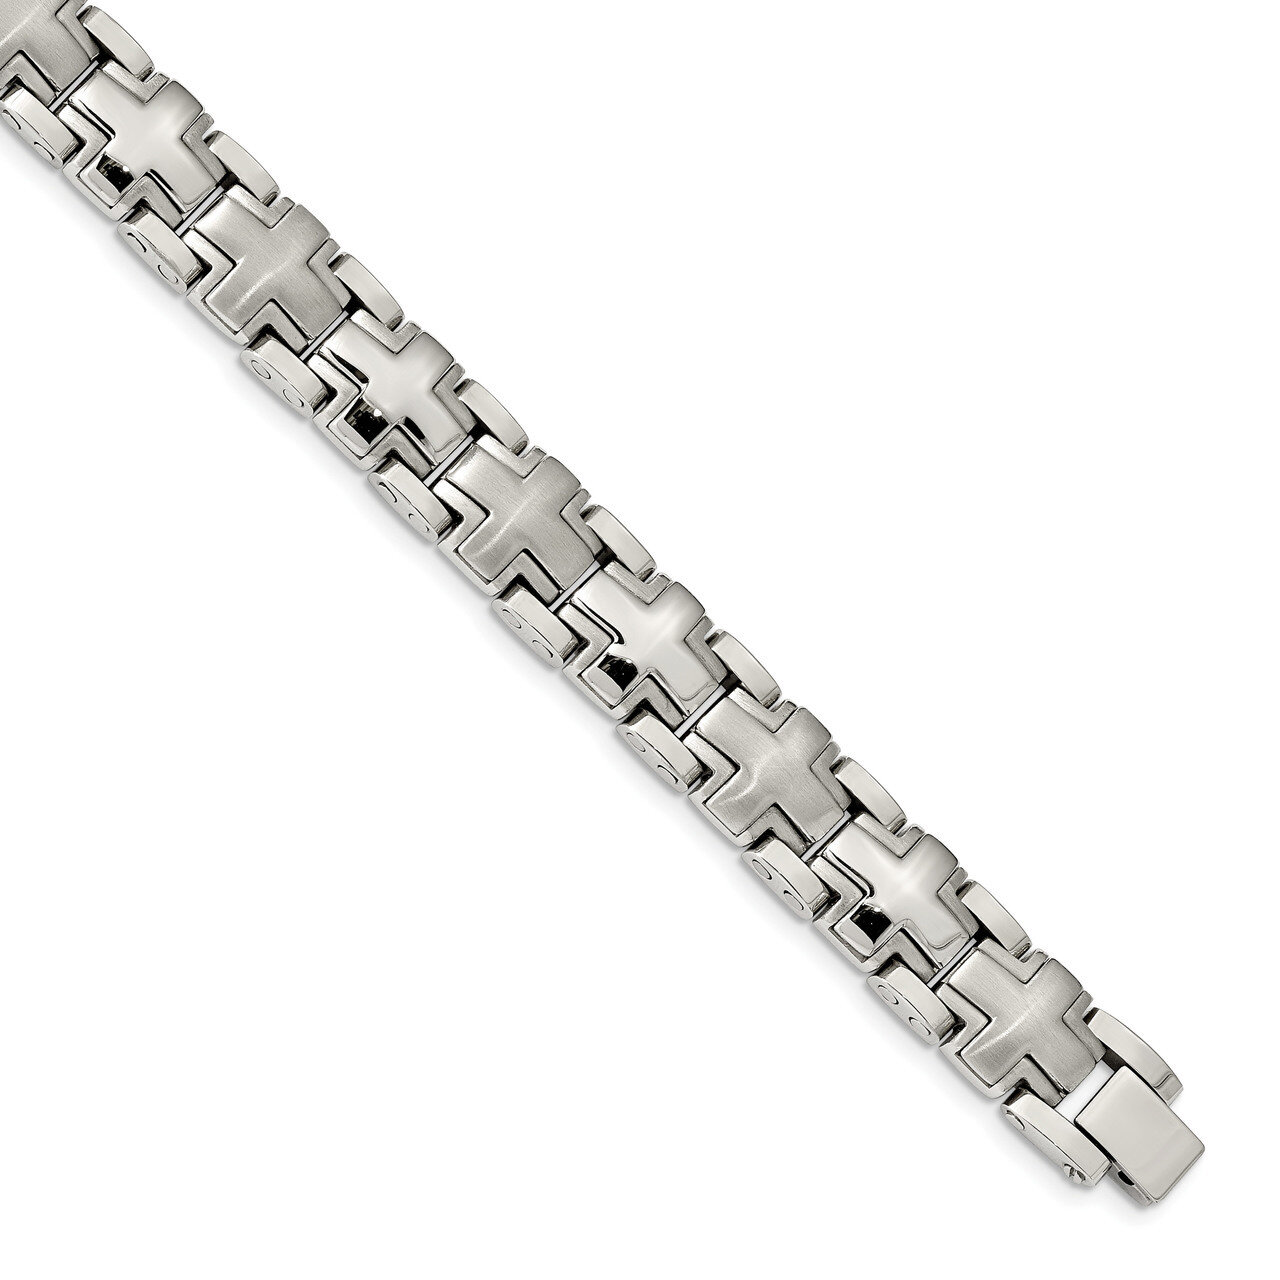 Cross 8.25 Inch Heavy Link Bracelet Stainless Steel Brushed and Polished SRB2173-8.25